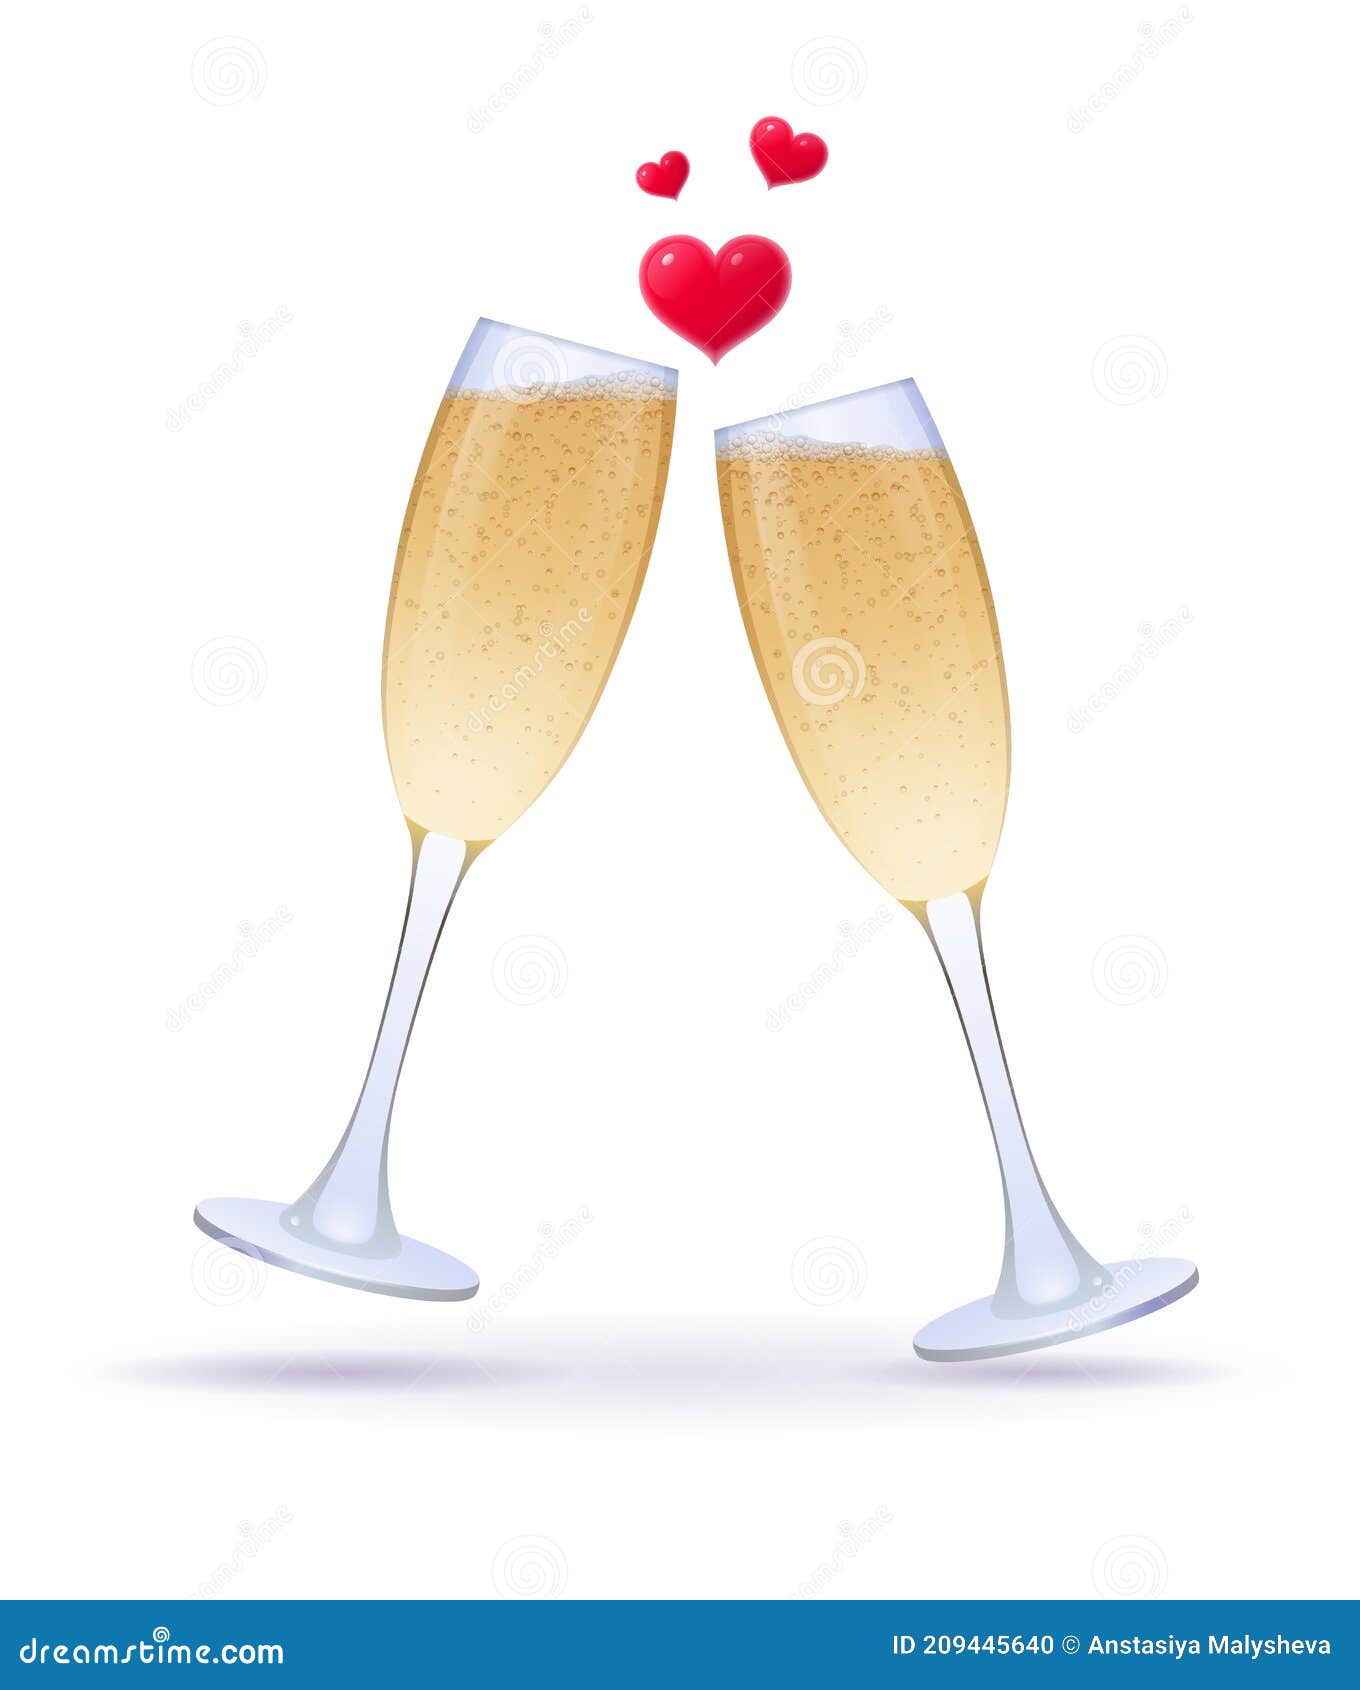 https://thumbs.dreamstime.com/z/pair-champagne-glasses-red-heart-clinking-romance-transparent-wine-wedding-engagement-valentines-day-symbols-realistic-209445640.jpg